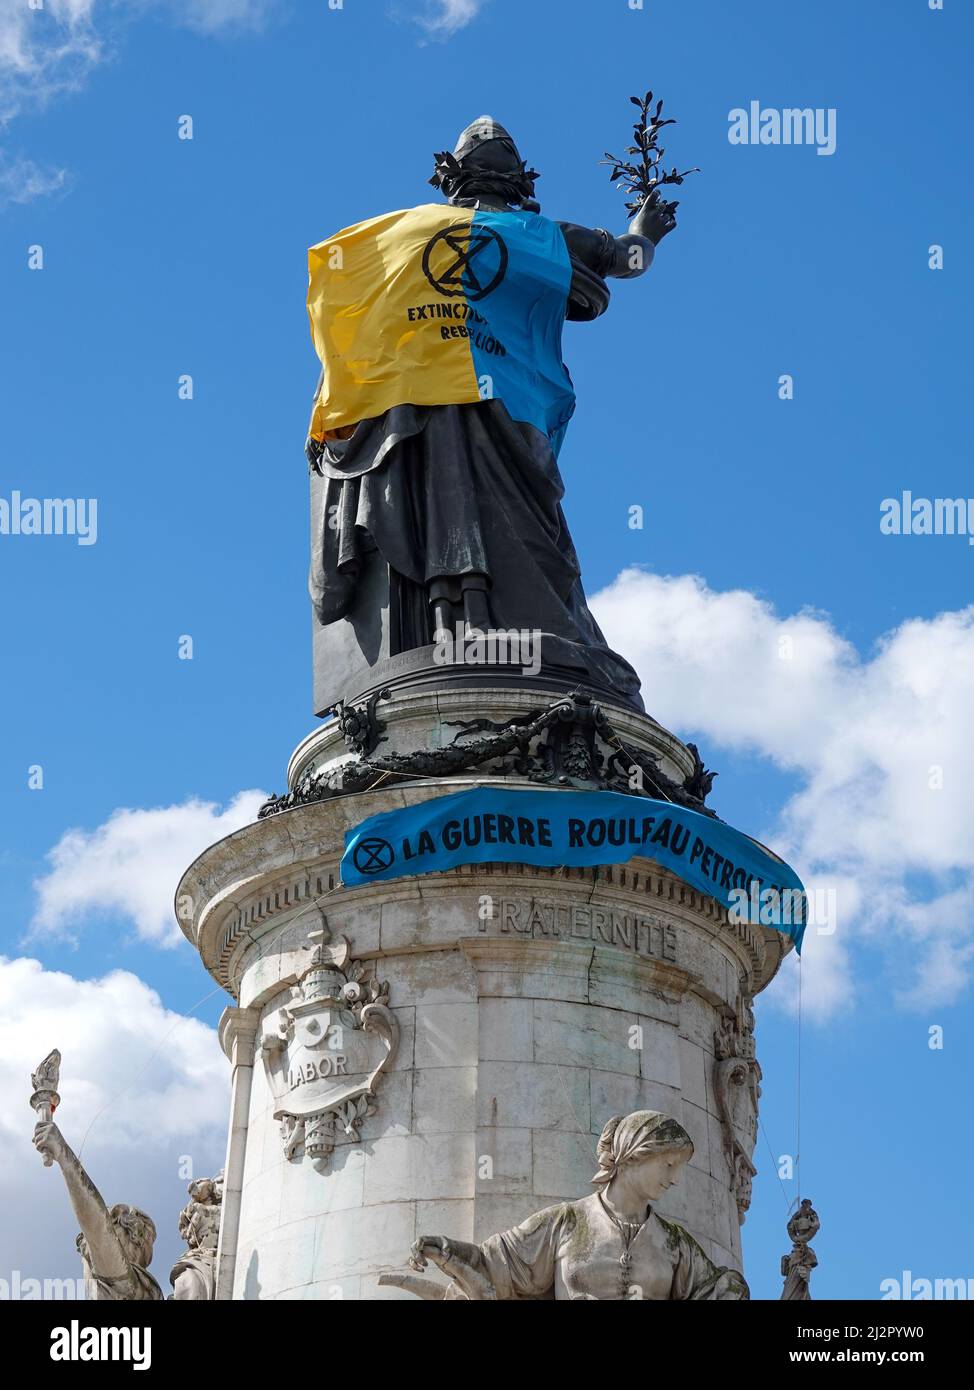 Monument to the Republic, adorned with a yellow and blue vest in Ukrainian flag colors, along with the symbol of the Extinction Rebellion, international social environmental movement, in protest of the war in Ukraine and the overuse of oil and its role in destroying the climate. 2 April 2022, Paris, France Stock Photo